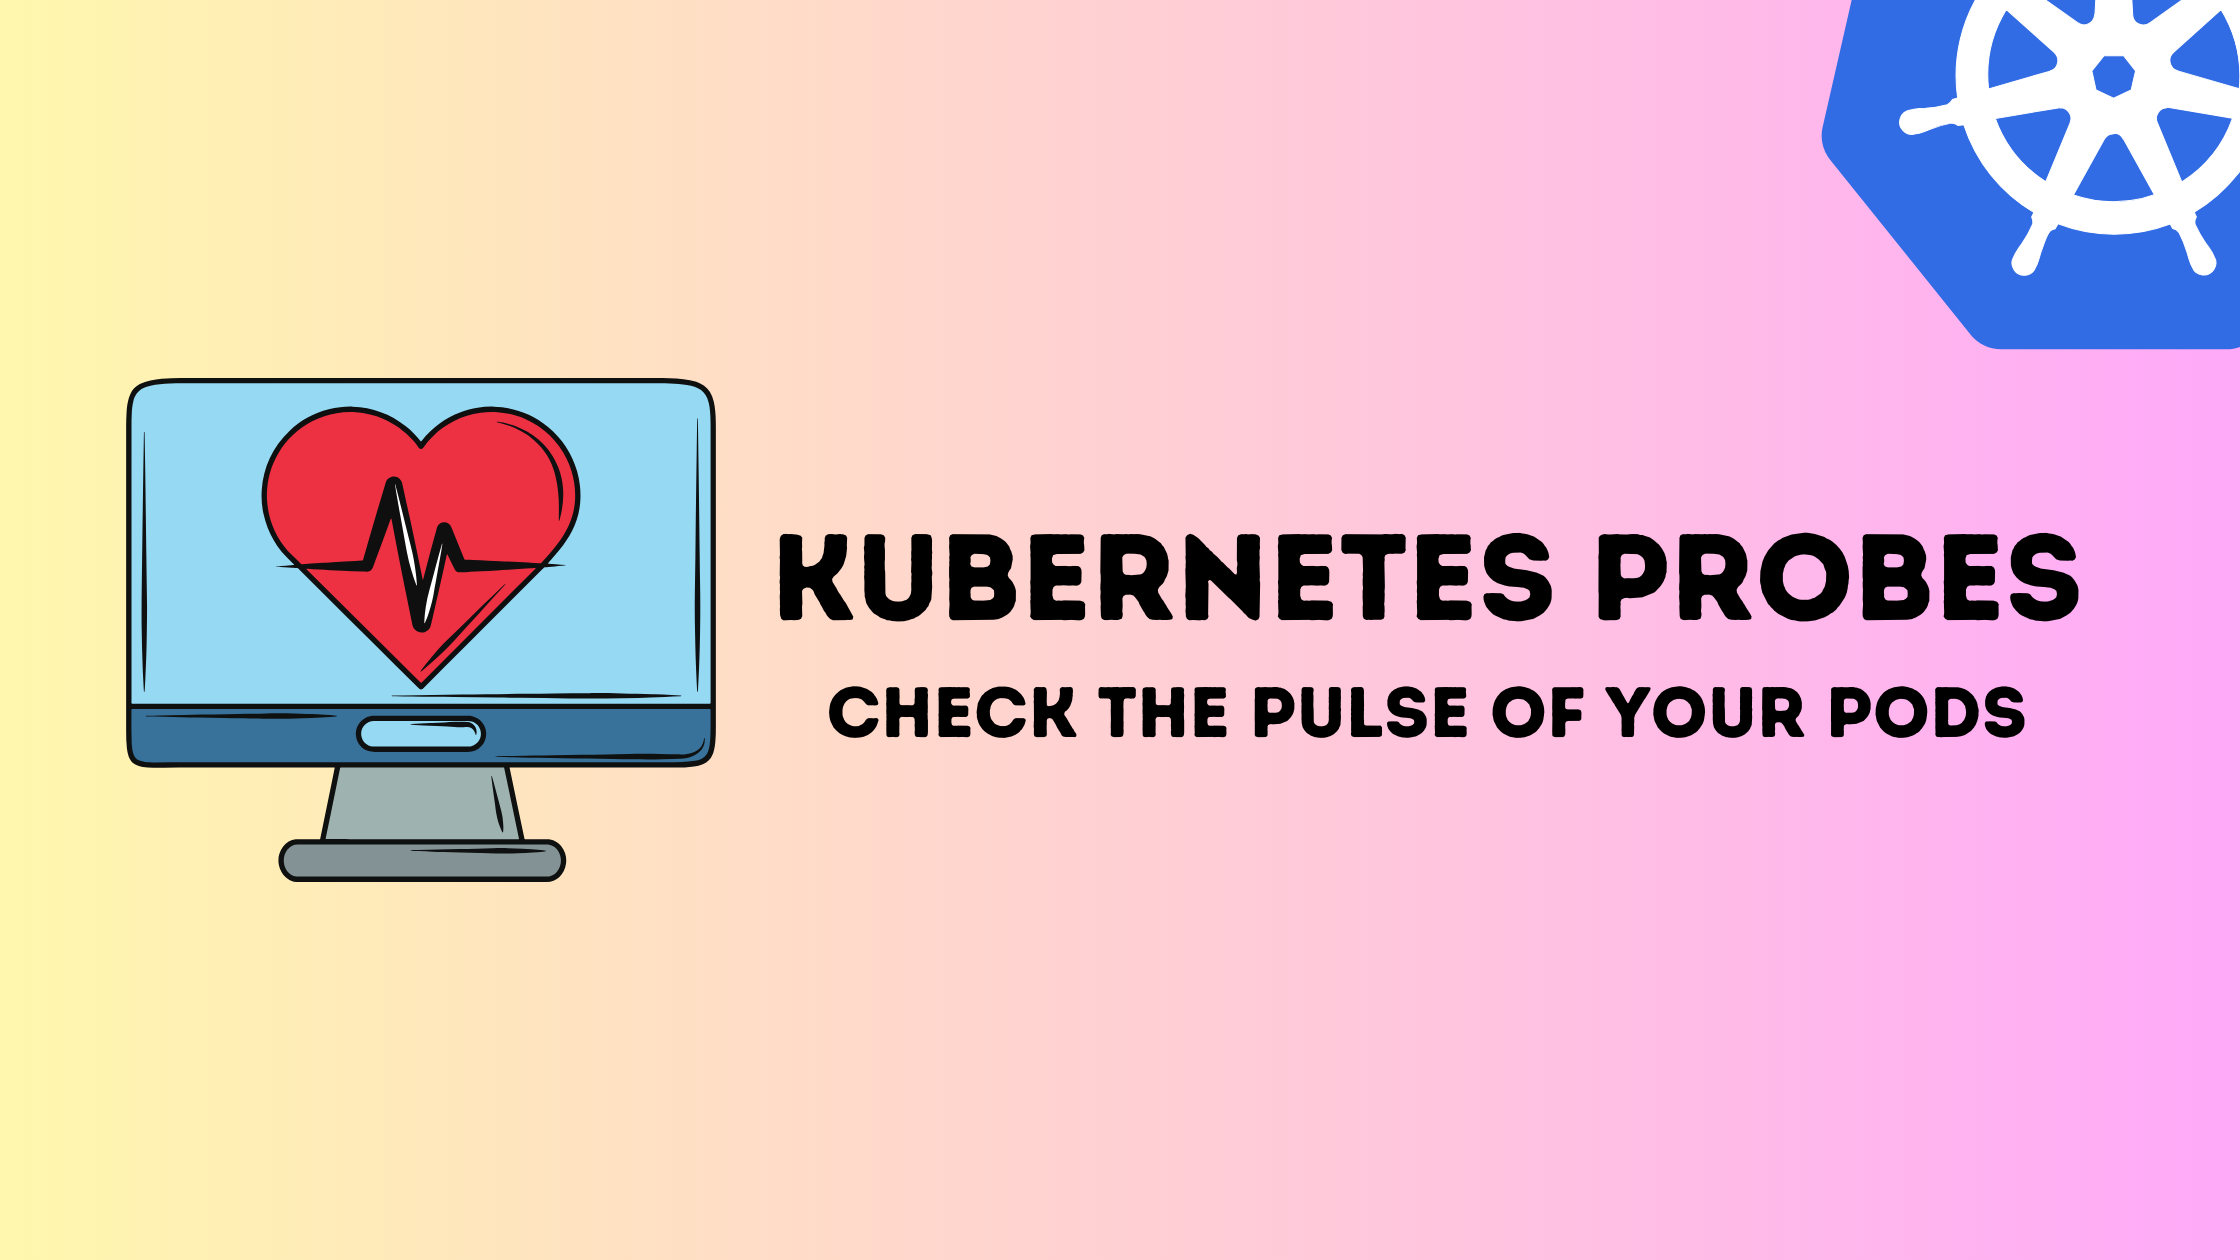 Kubernetes Probes: Check The Pulse of Your Pods feature image